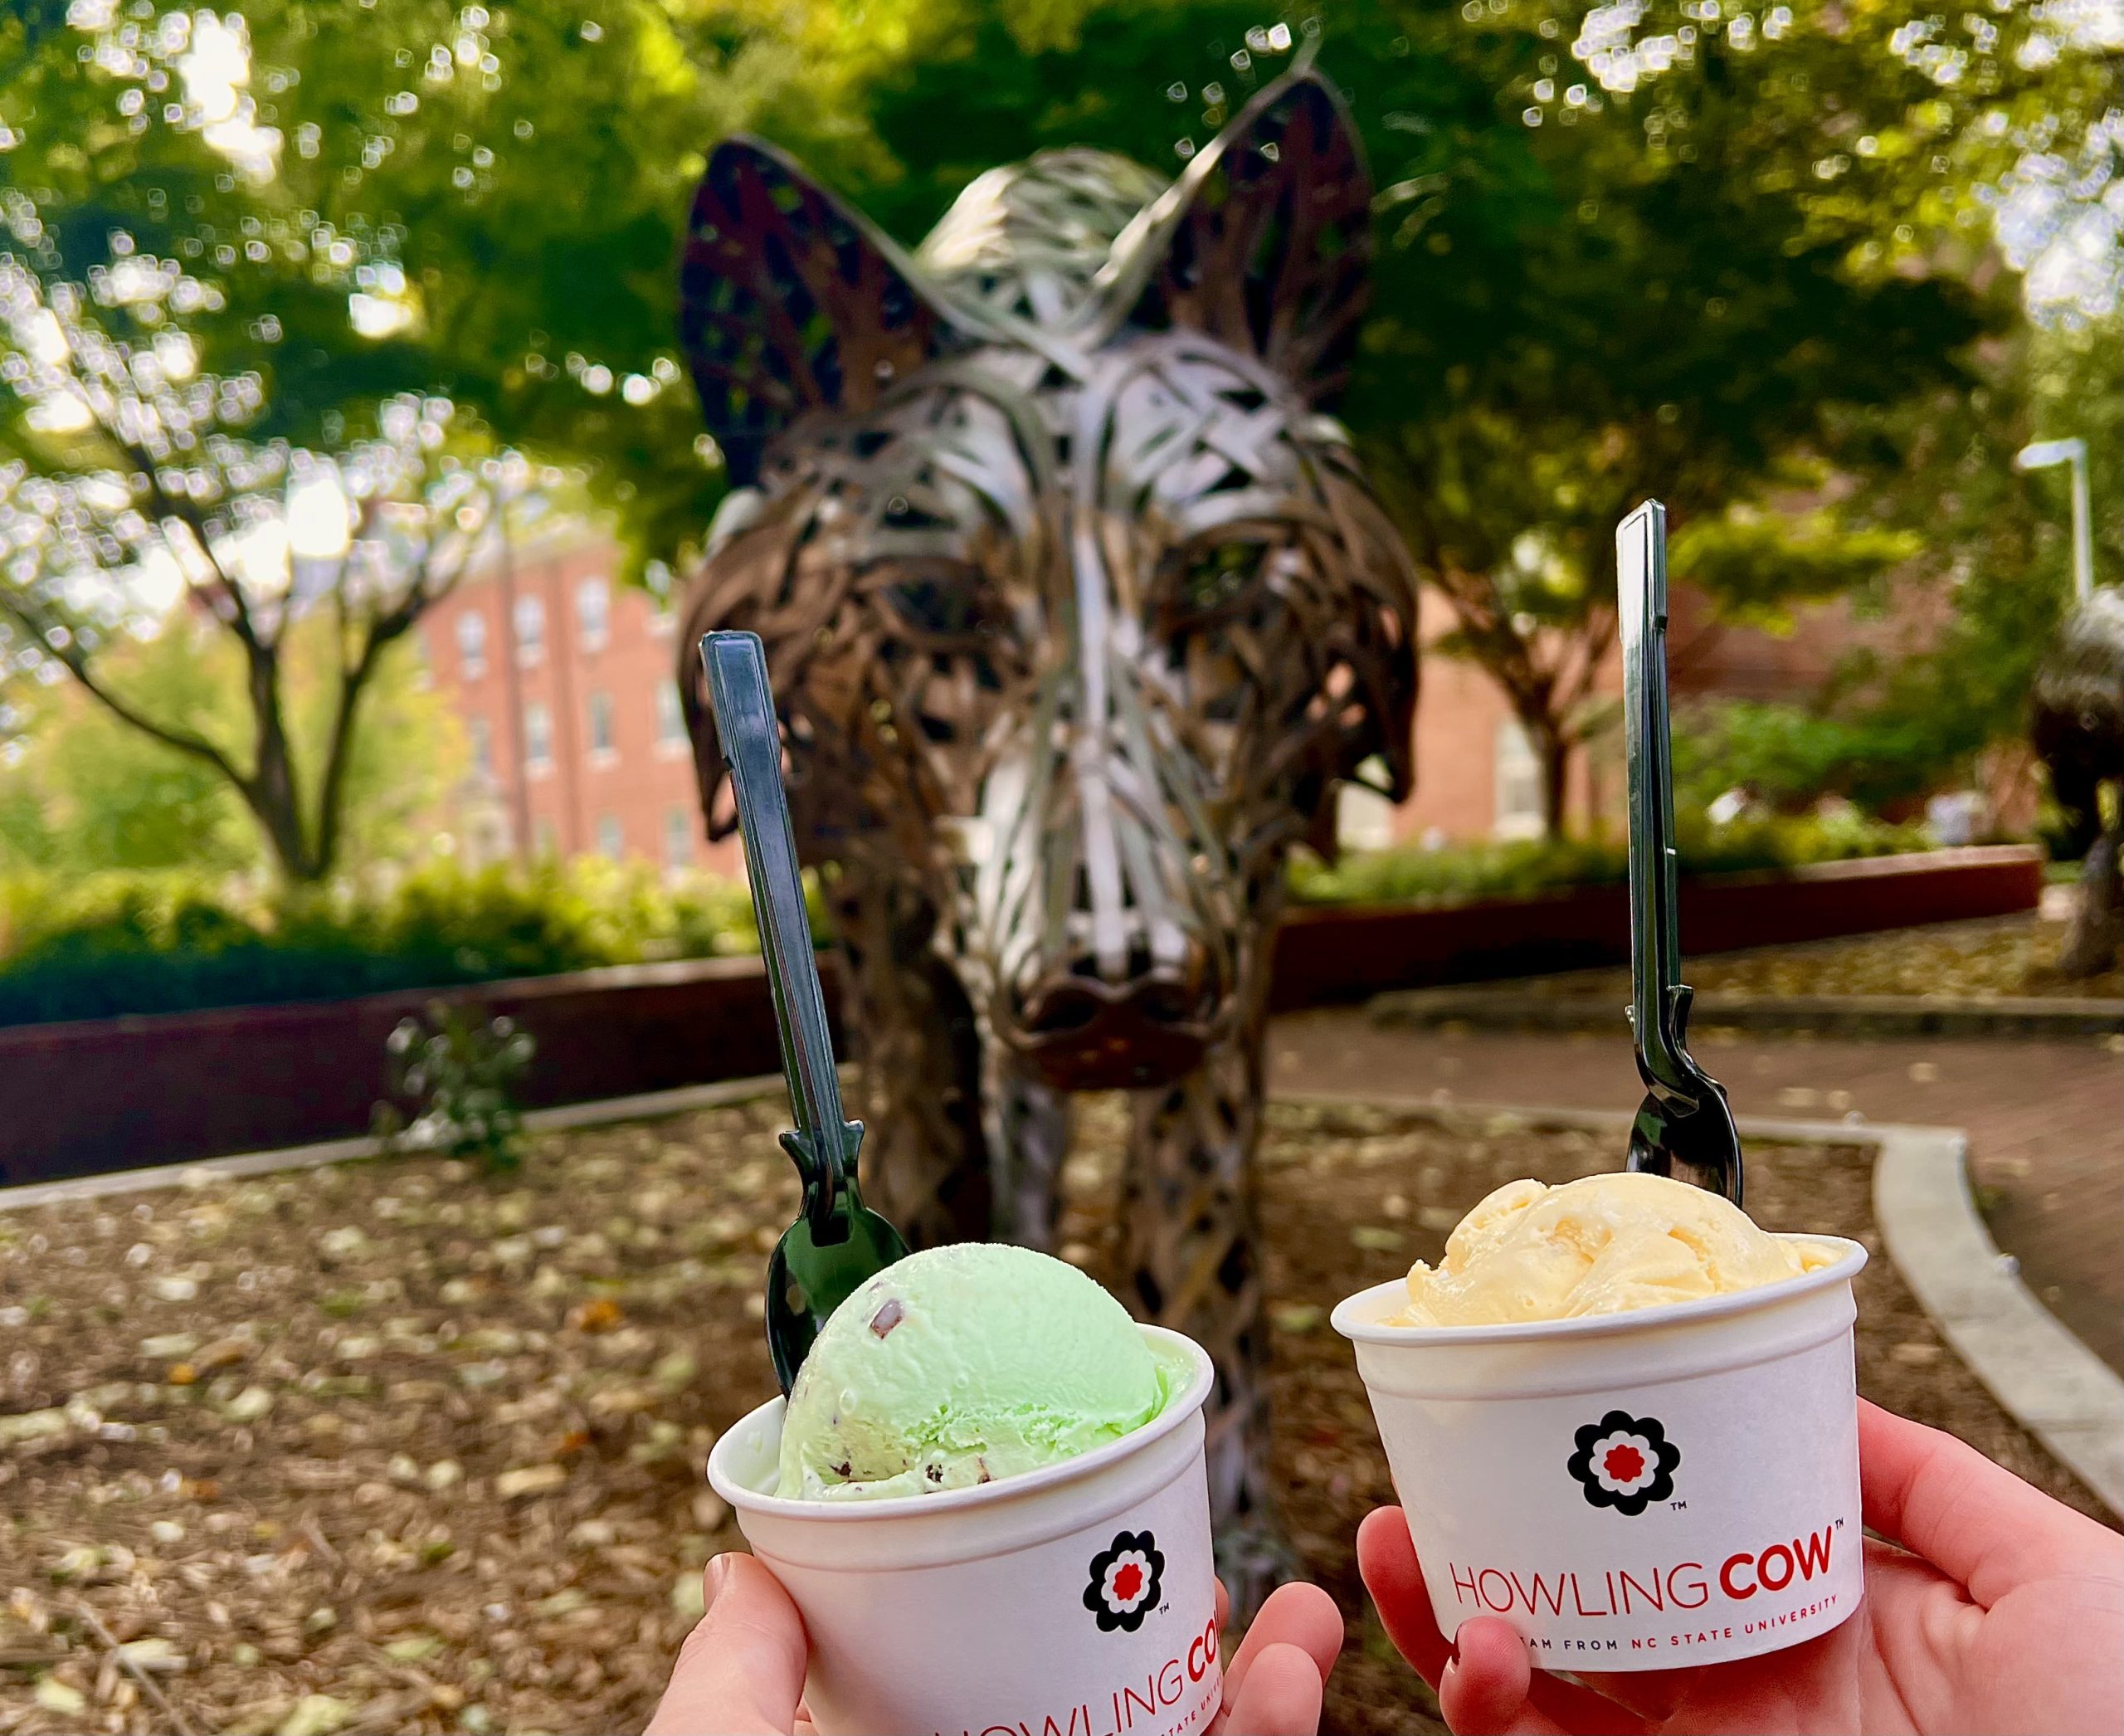 Howling cow ice cream in front of Talley wolves